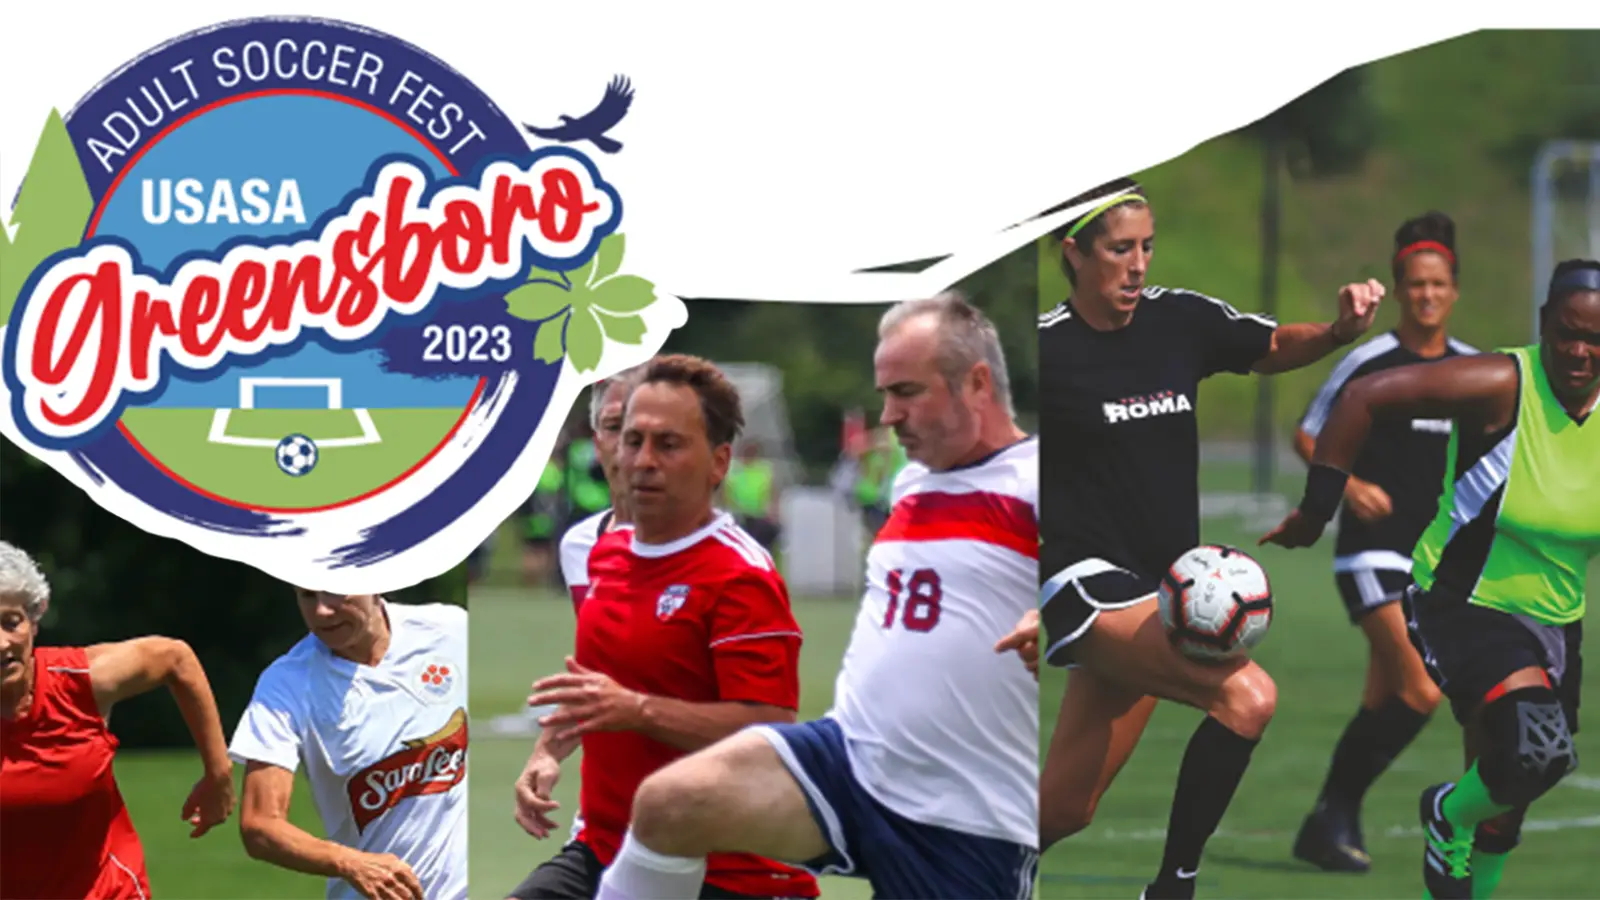 2023 ADULT SOCCER FEST Coming to Greensboro NC